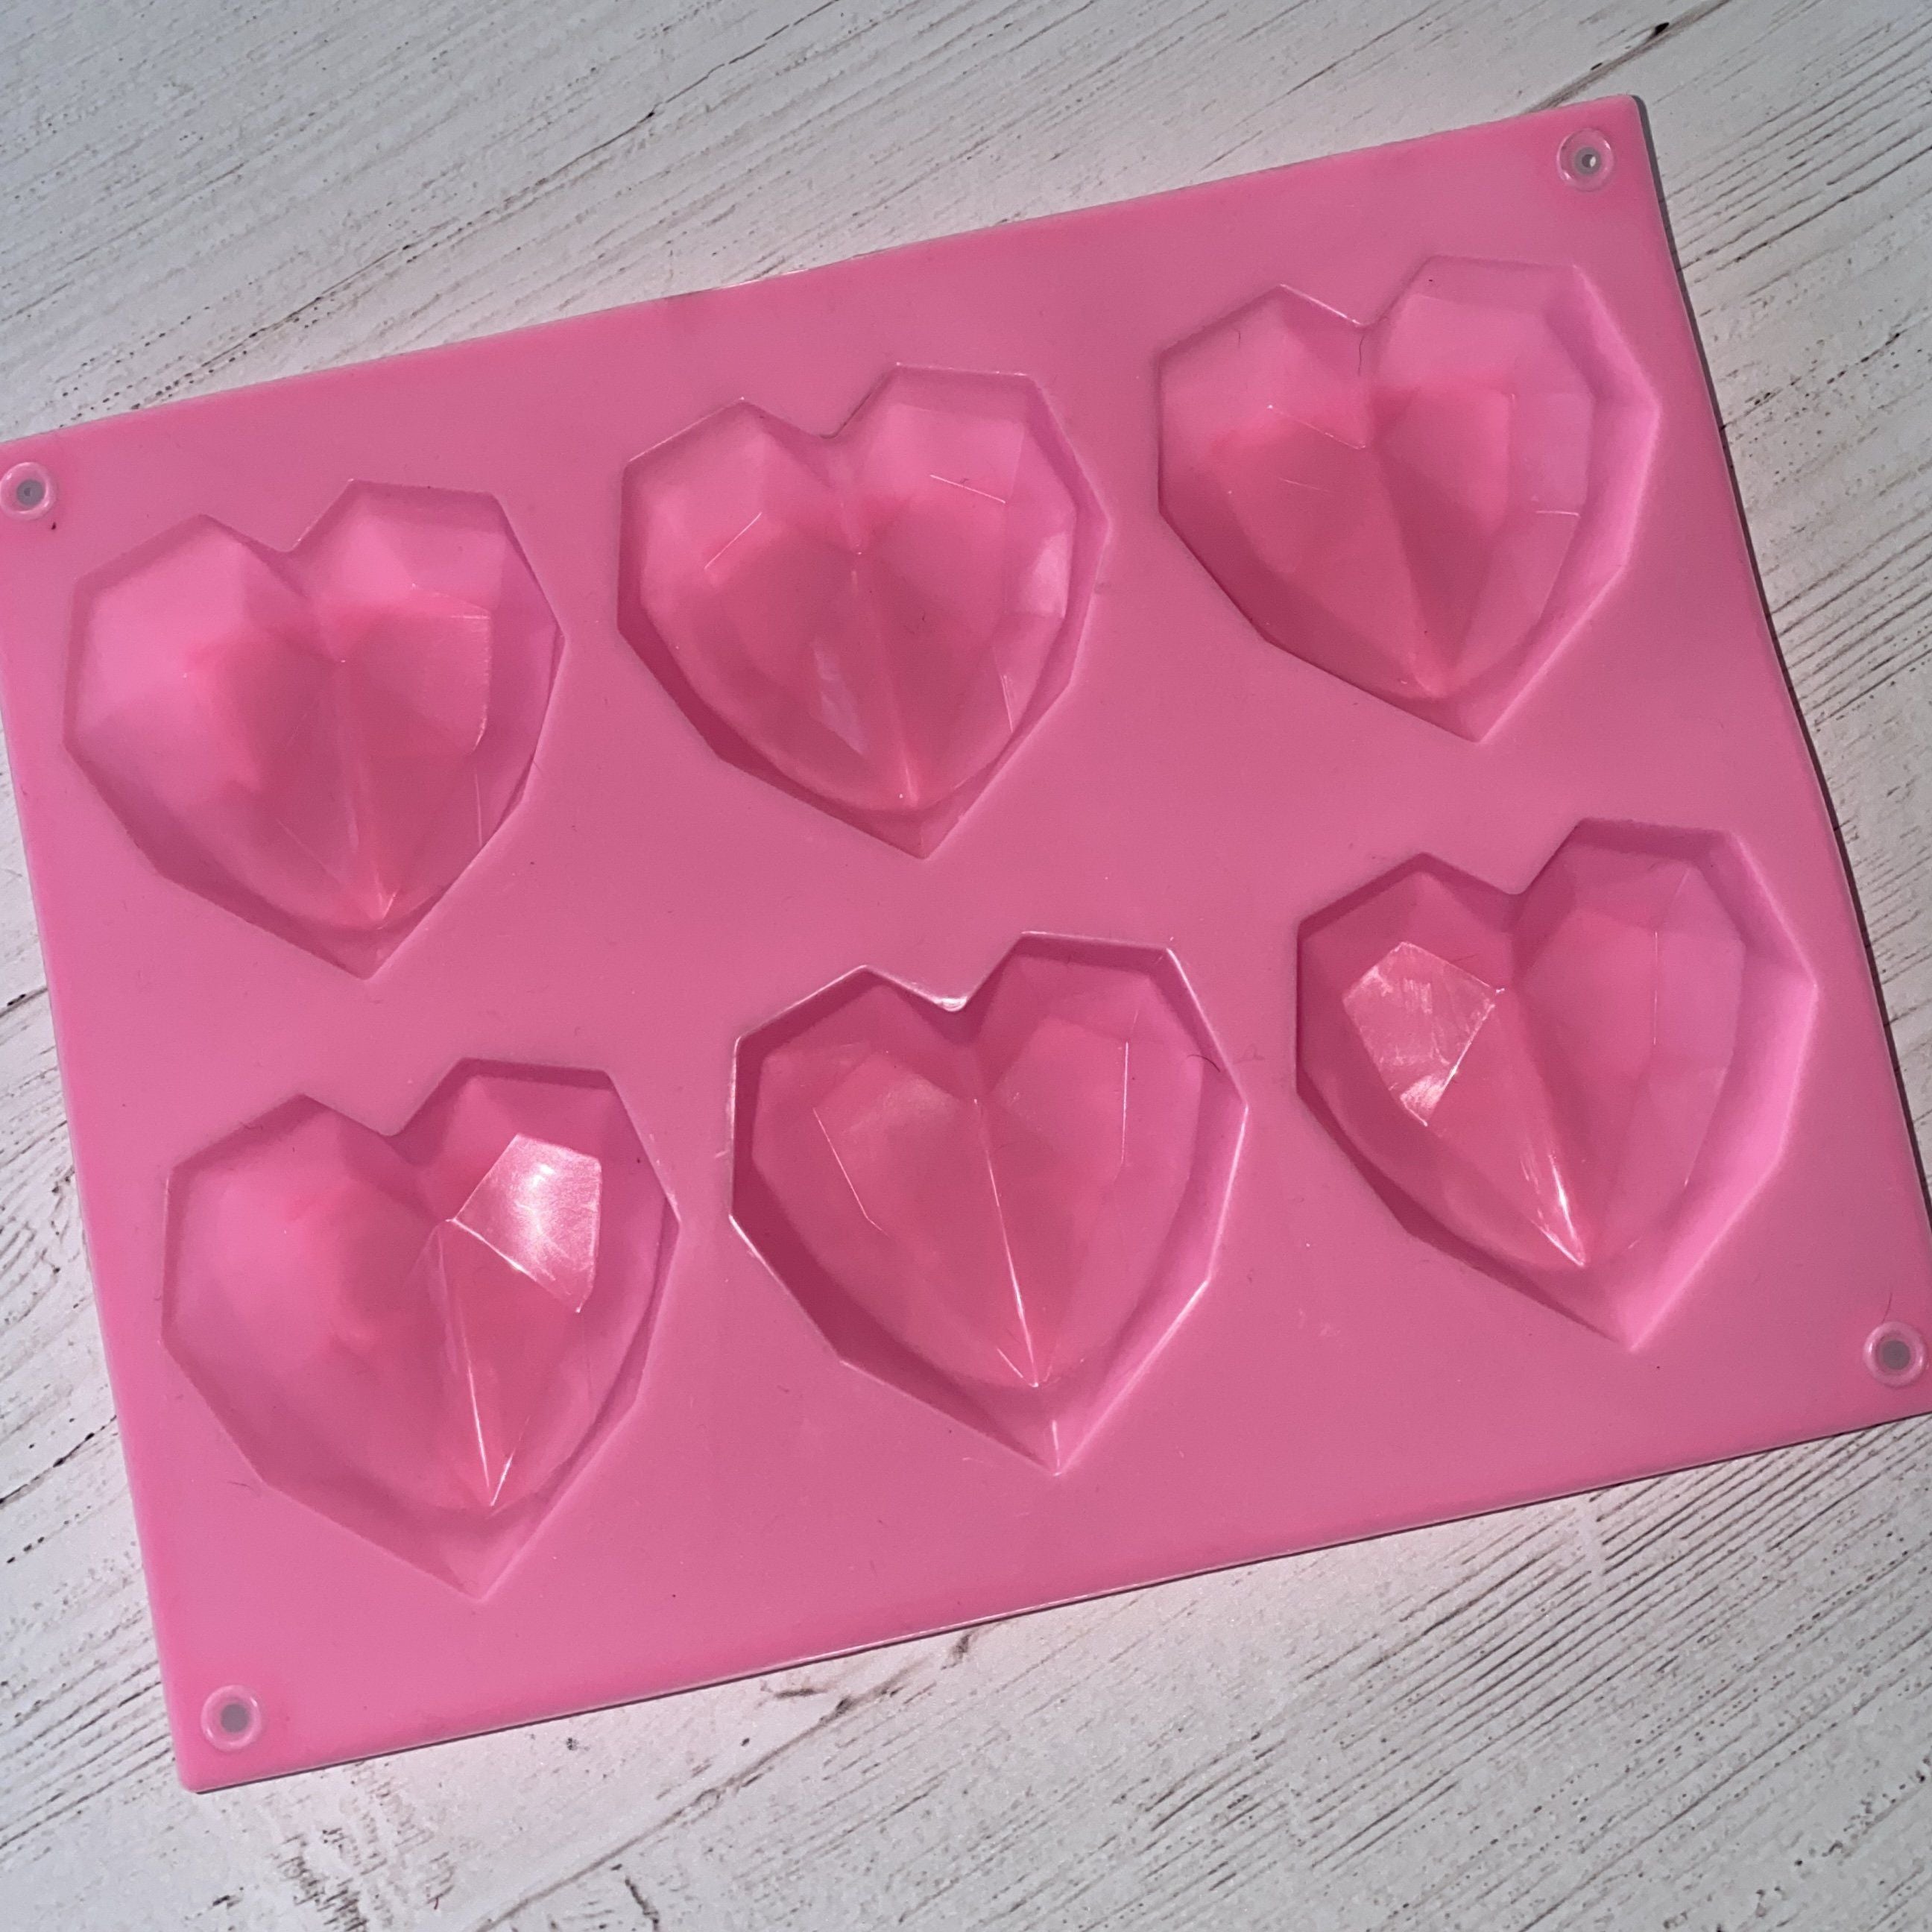 Moracc] Silicone Ice Mold Pink